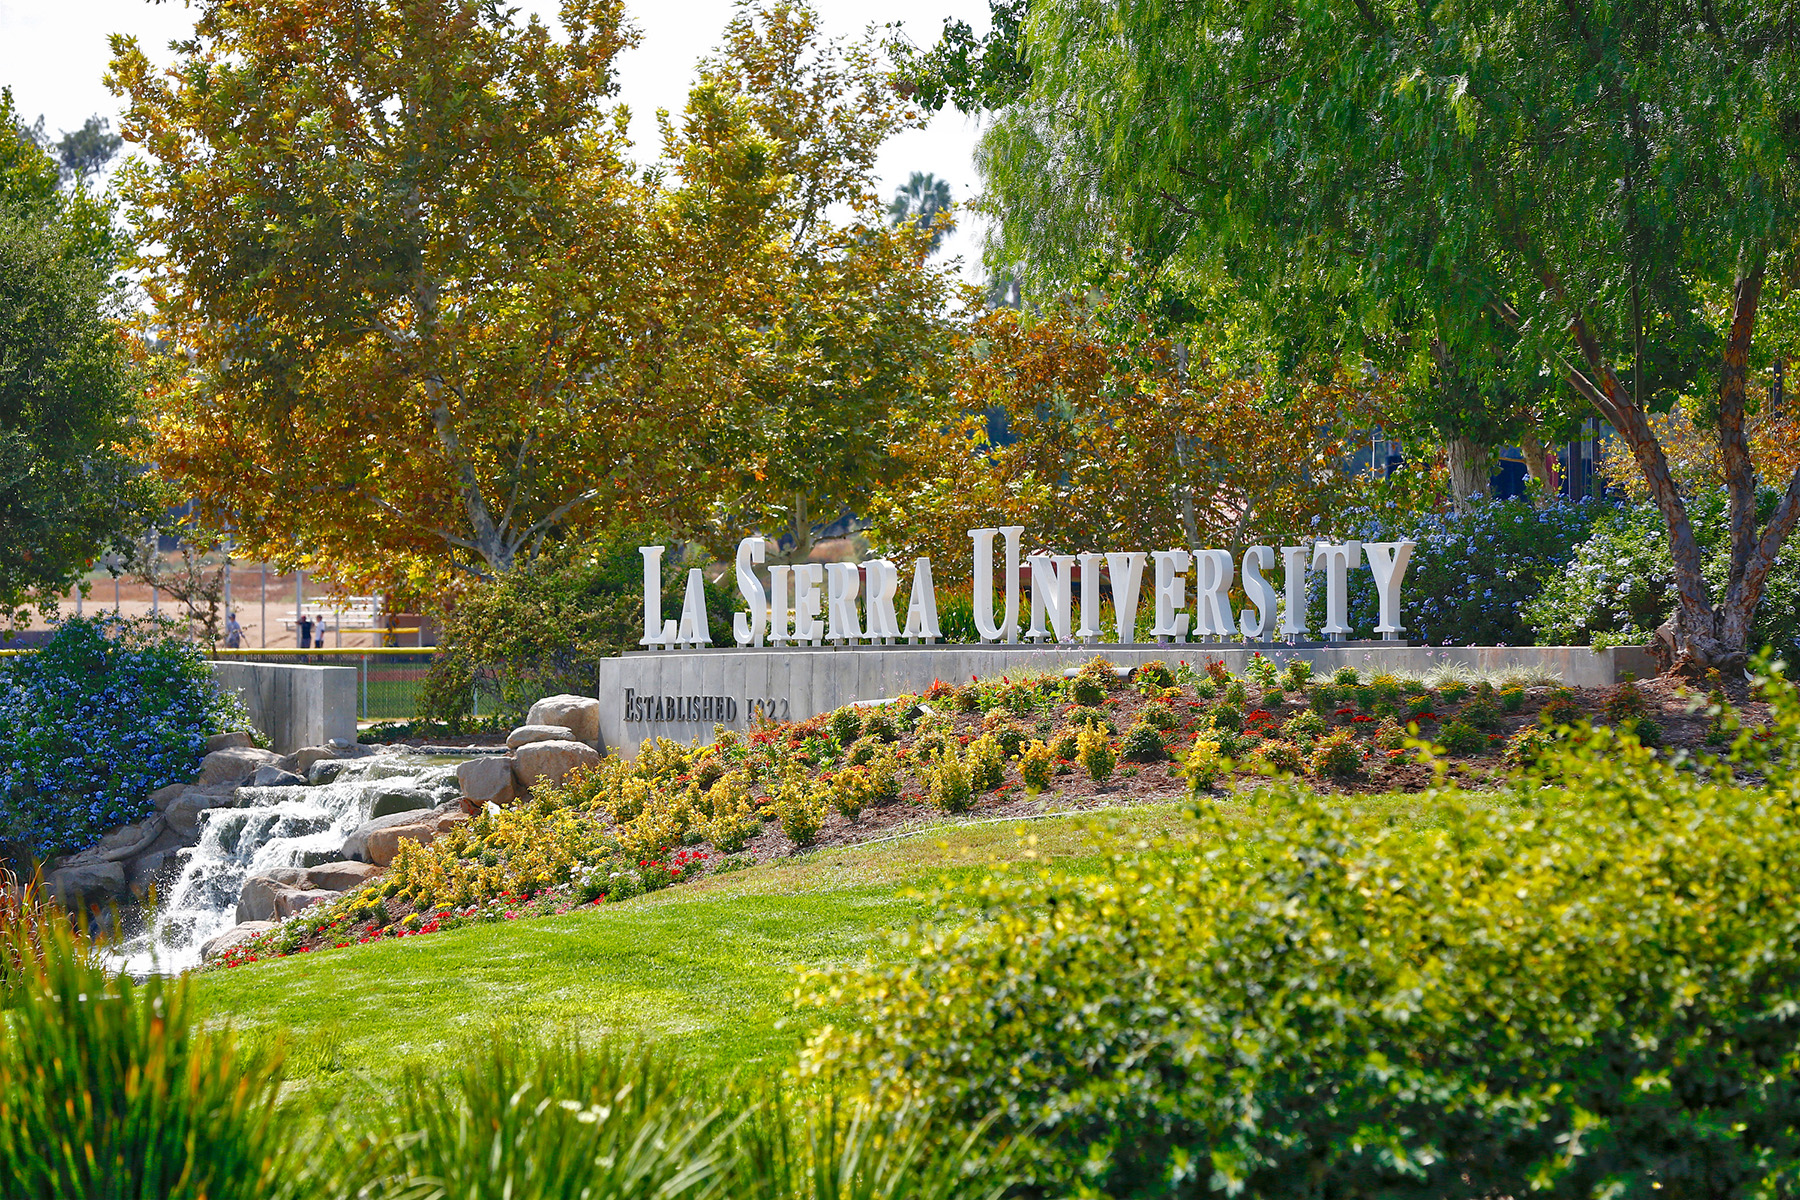 Hill decorated with white letters reading "La Sierra University."